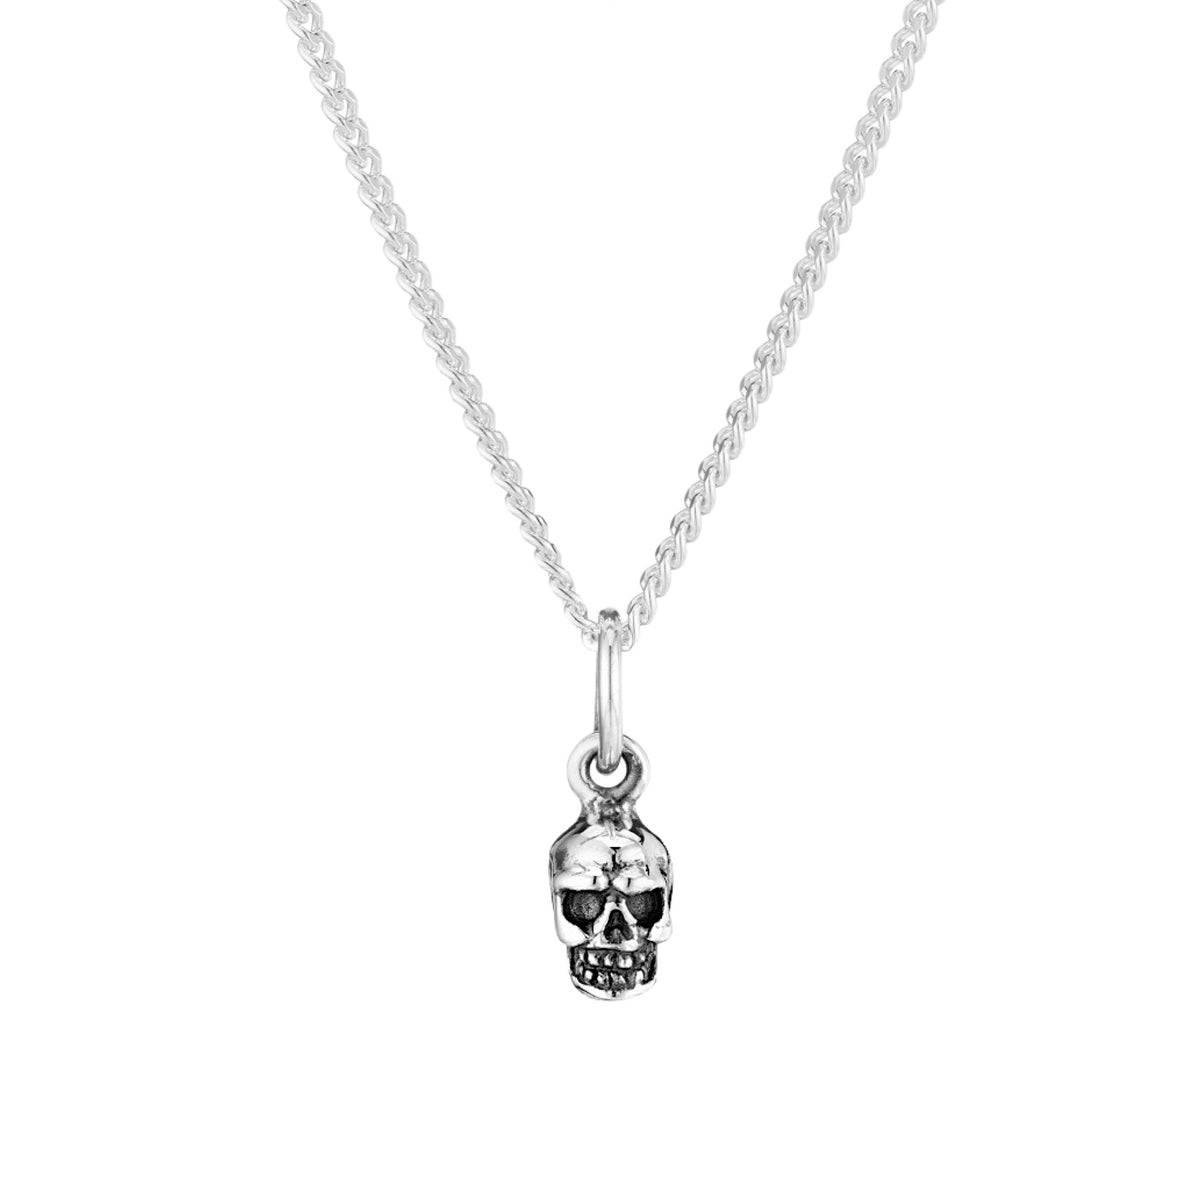 IMMORTAL - Sterling Silver Necklace